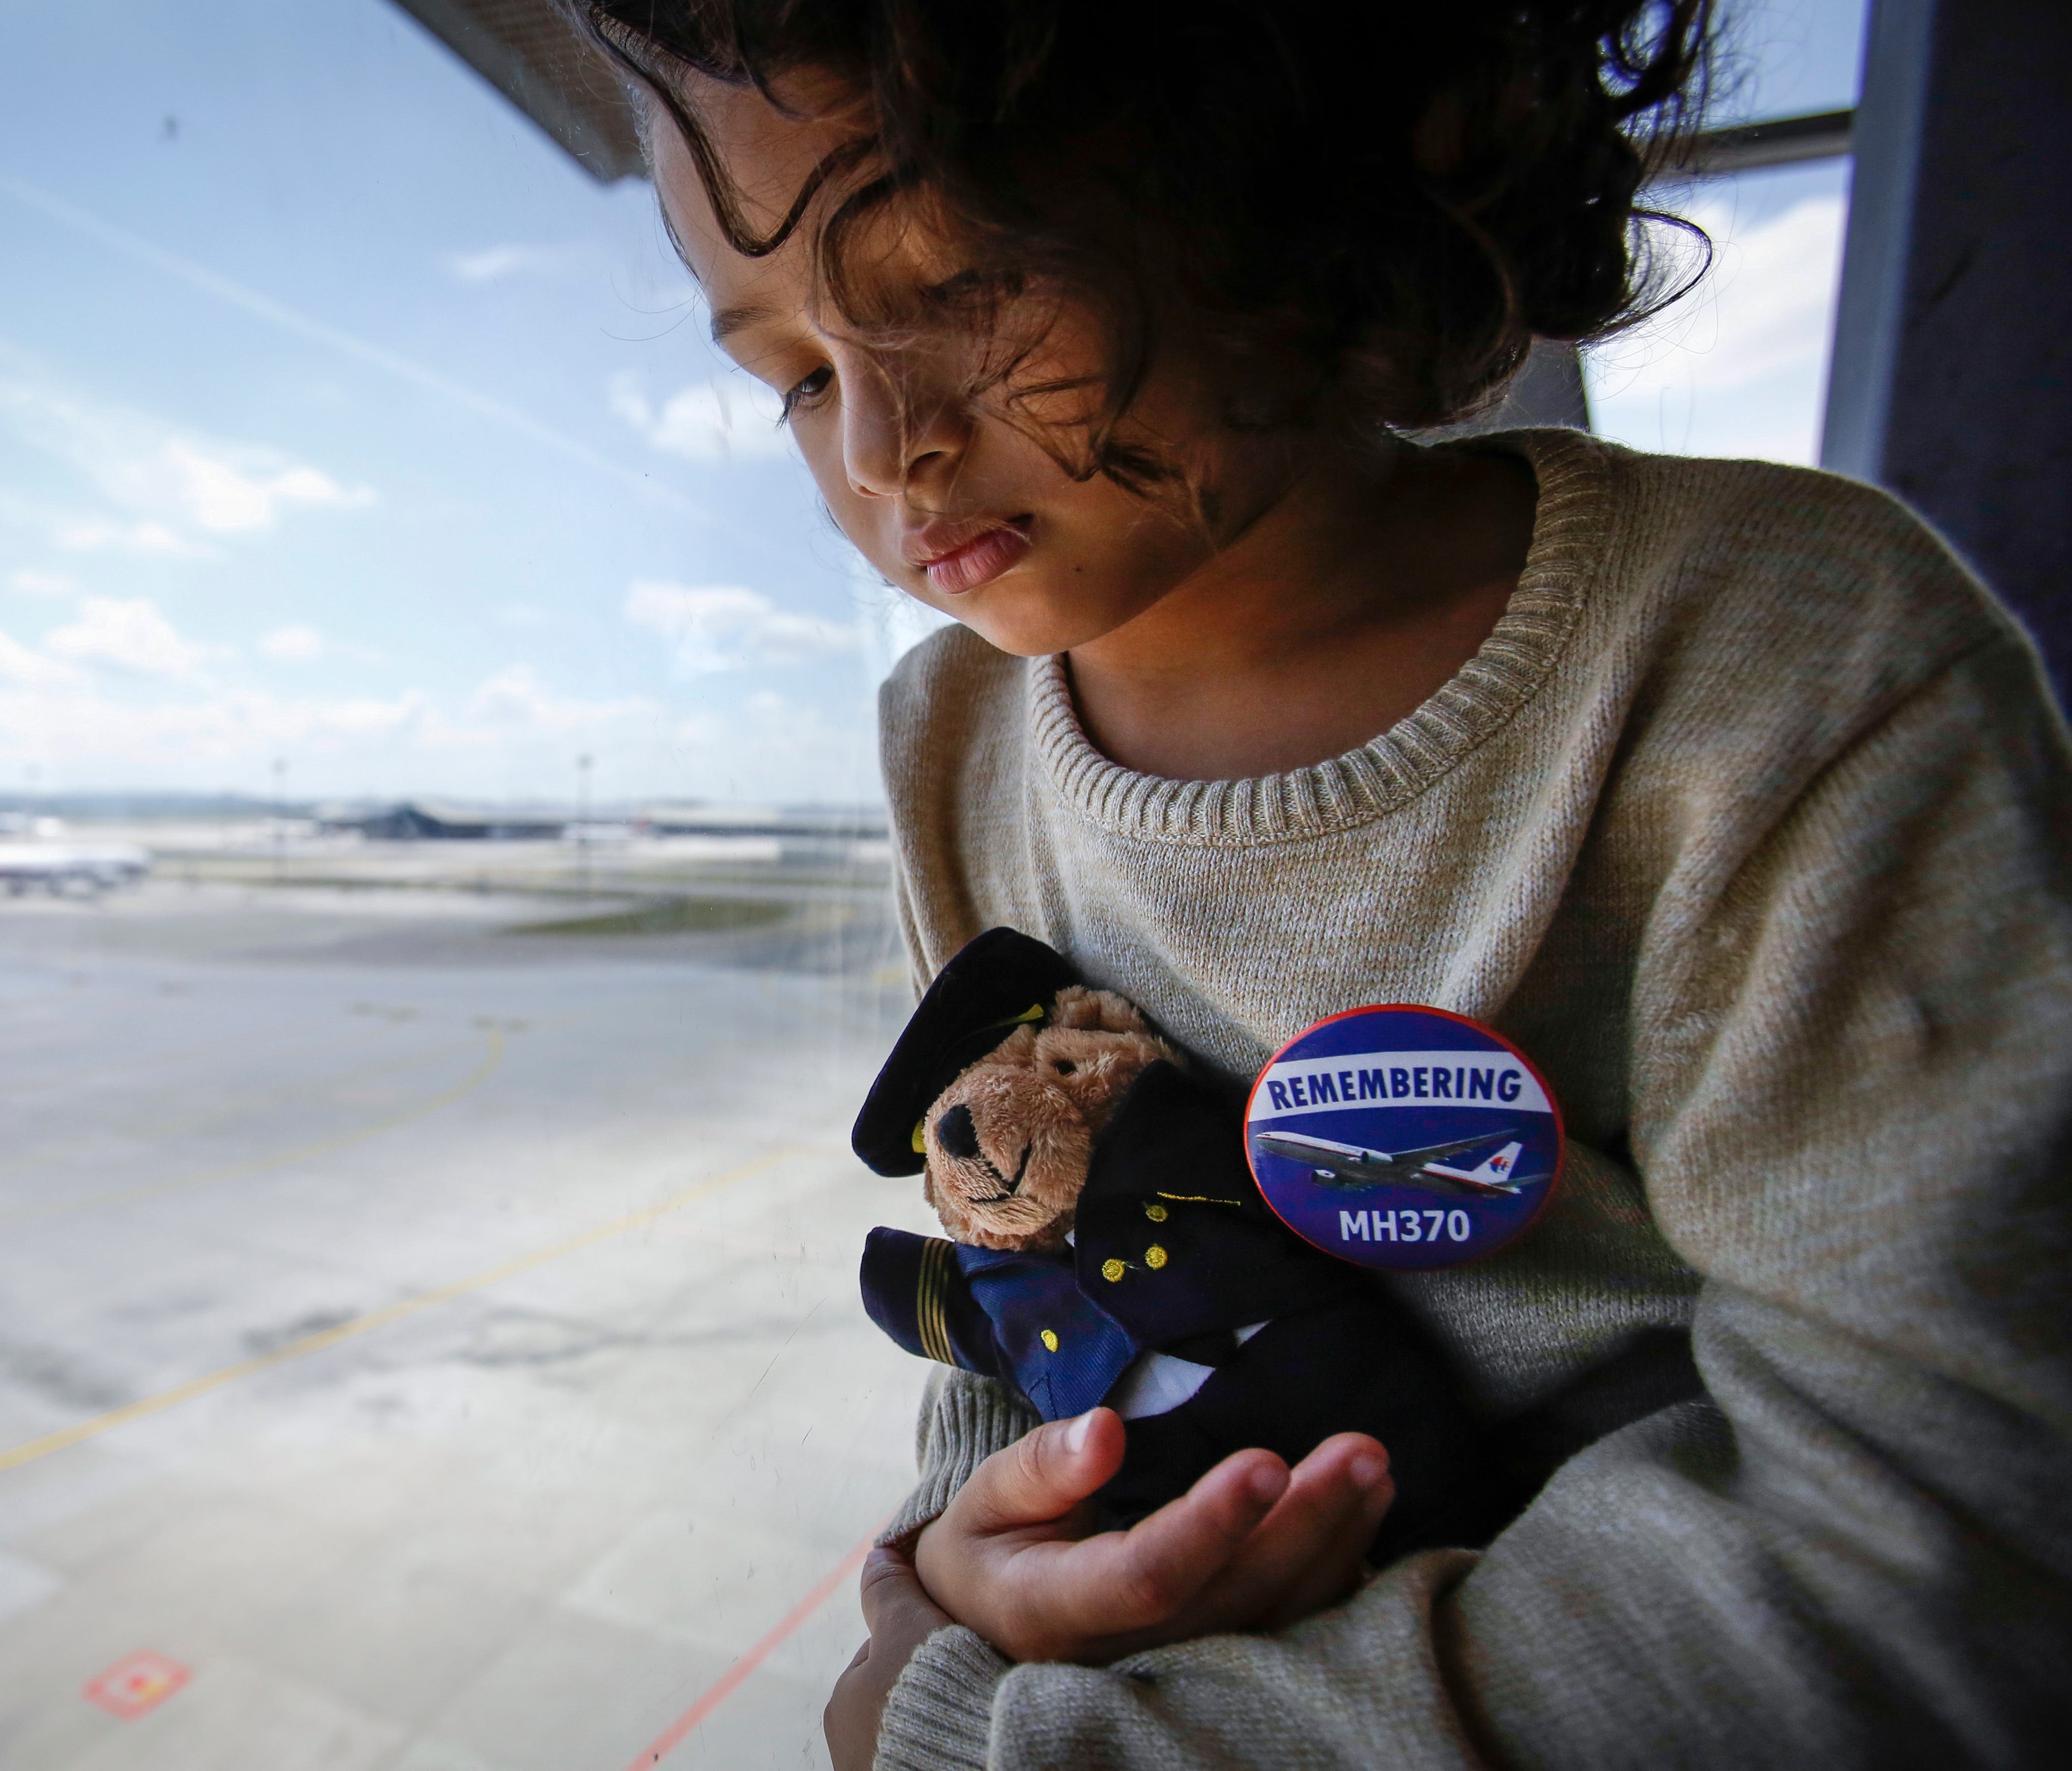 Raphael Ariano, 5, grandson of Patrick Gomes, inflight supervisor on the ill fated Malaysia Airlines Flight 370, holds a soft toy after a memorial service for the second anniversary of the jet's March 8, 2014, disappearance, at the Kuala Lumpur Inter